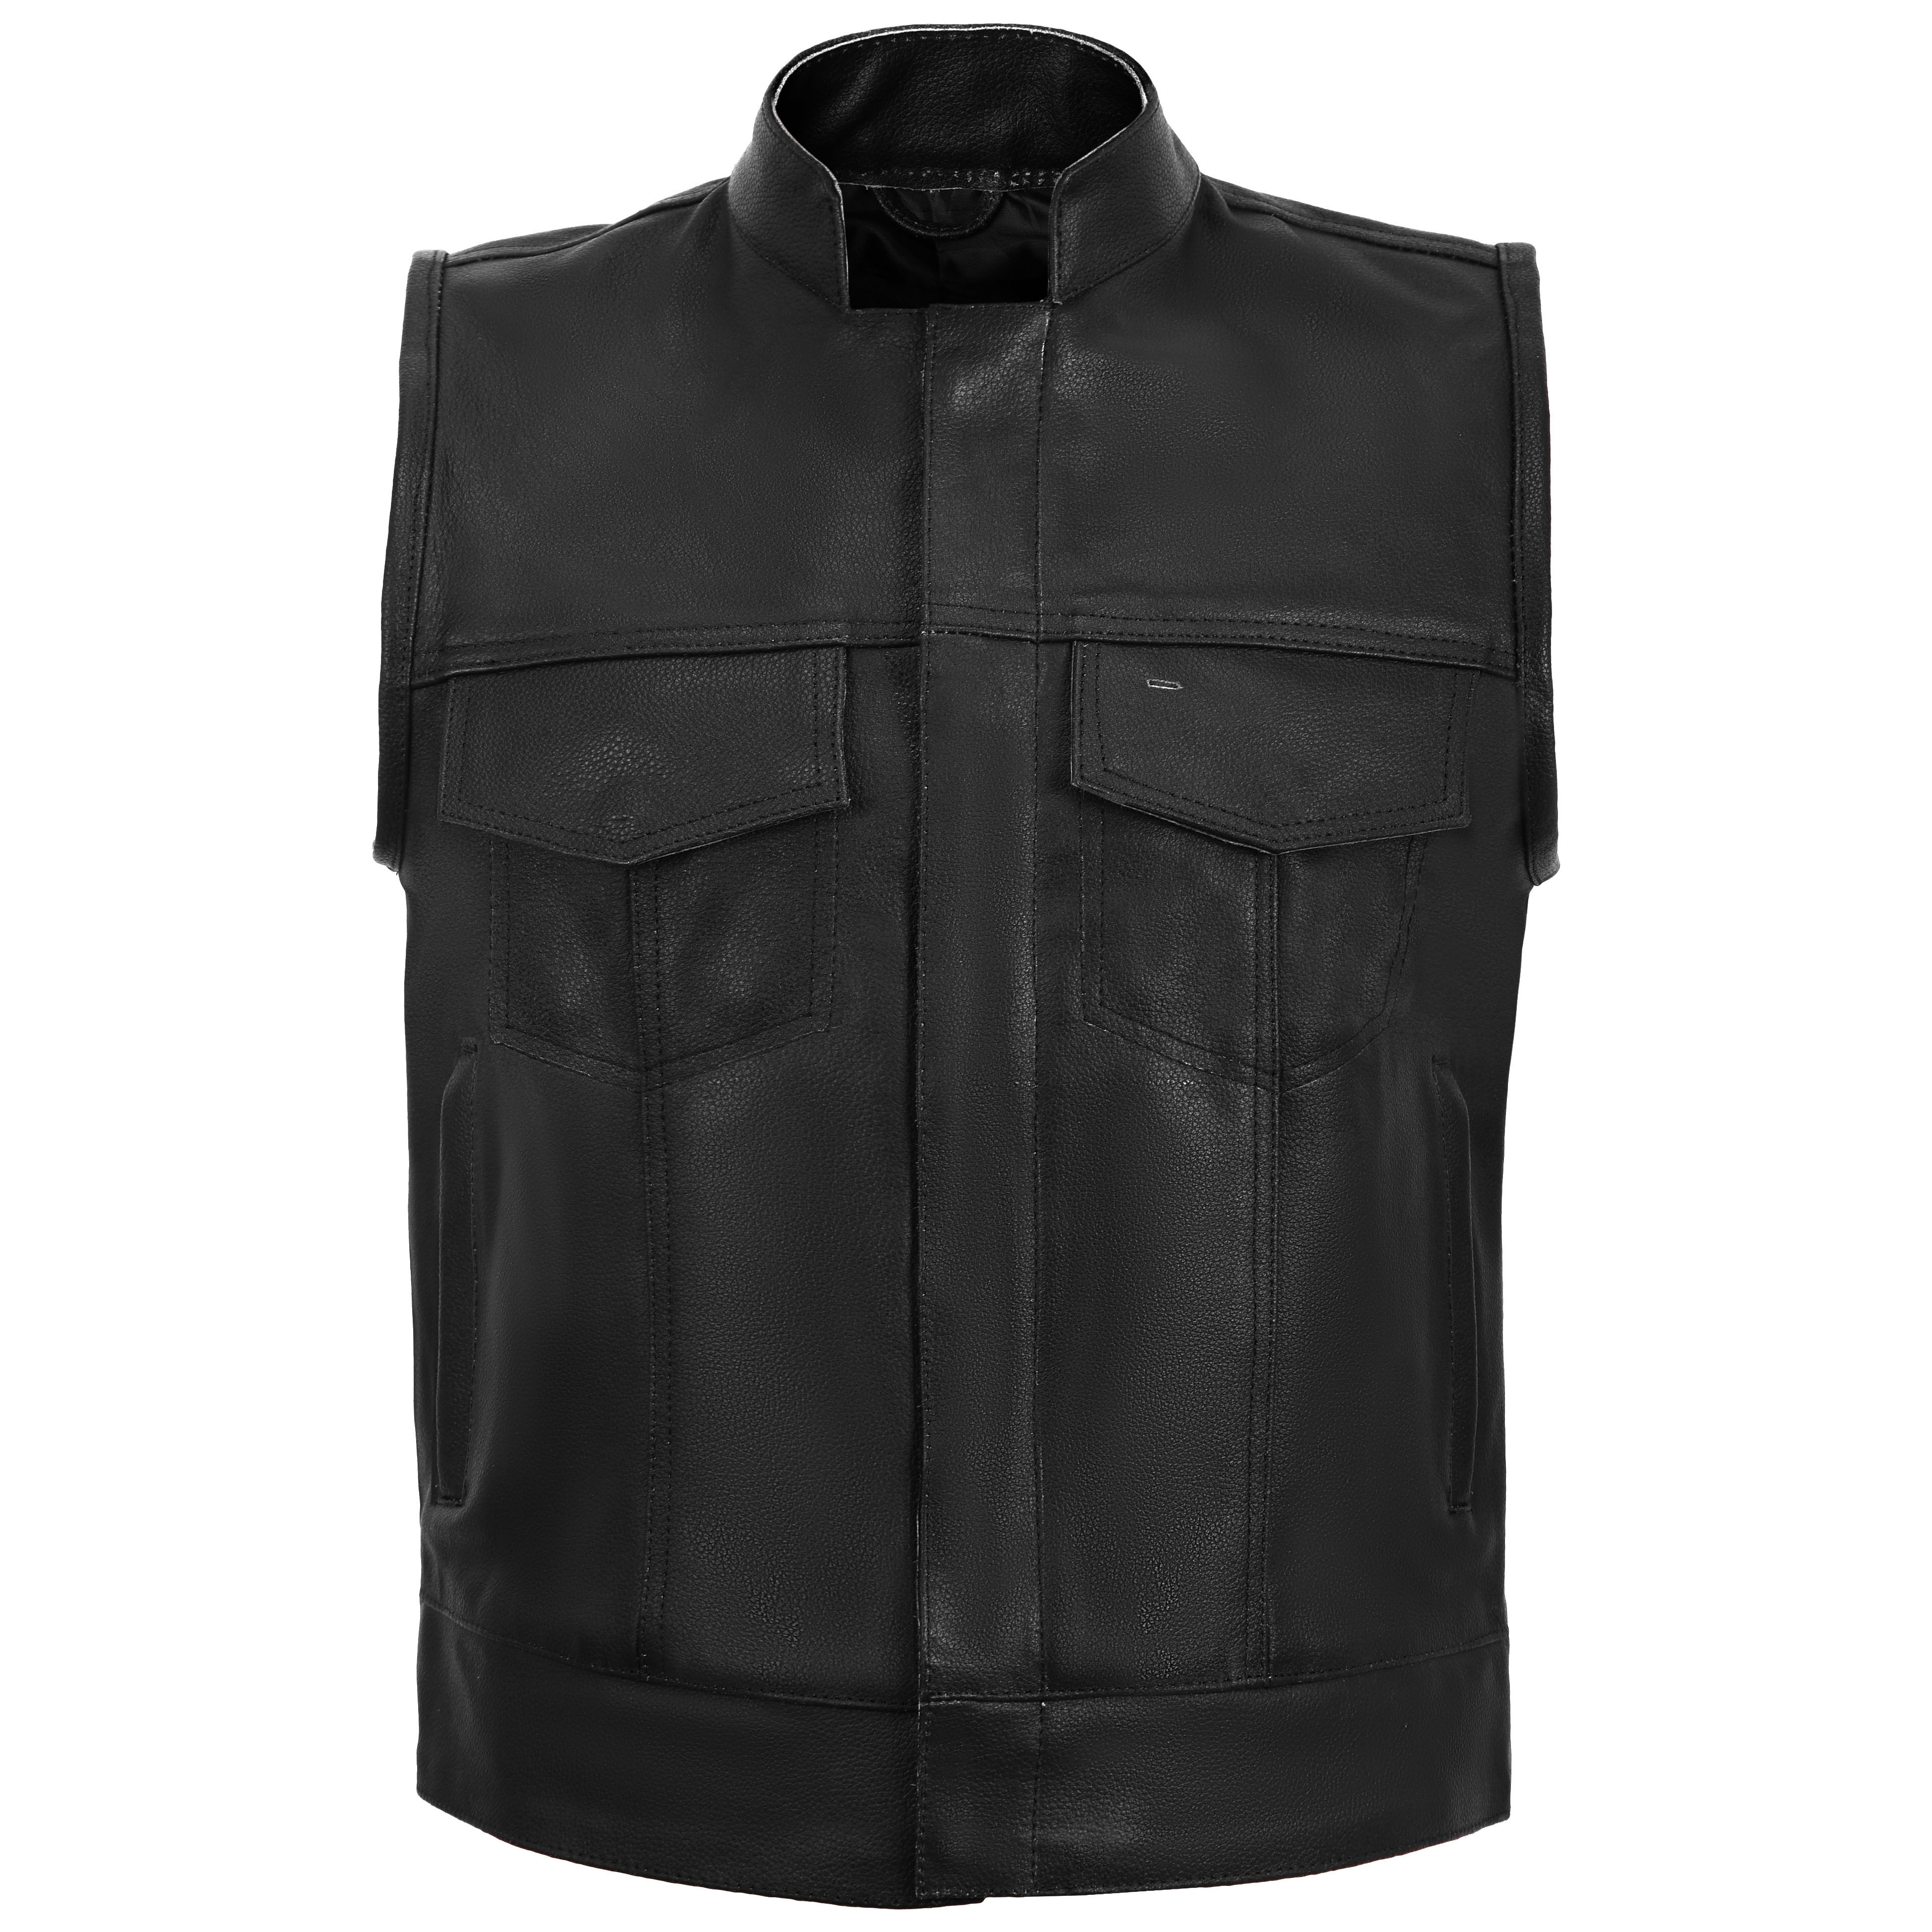 Sons of Anarchy style Leather biker vest